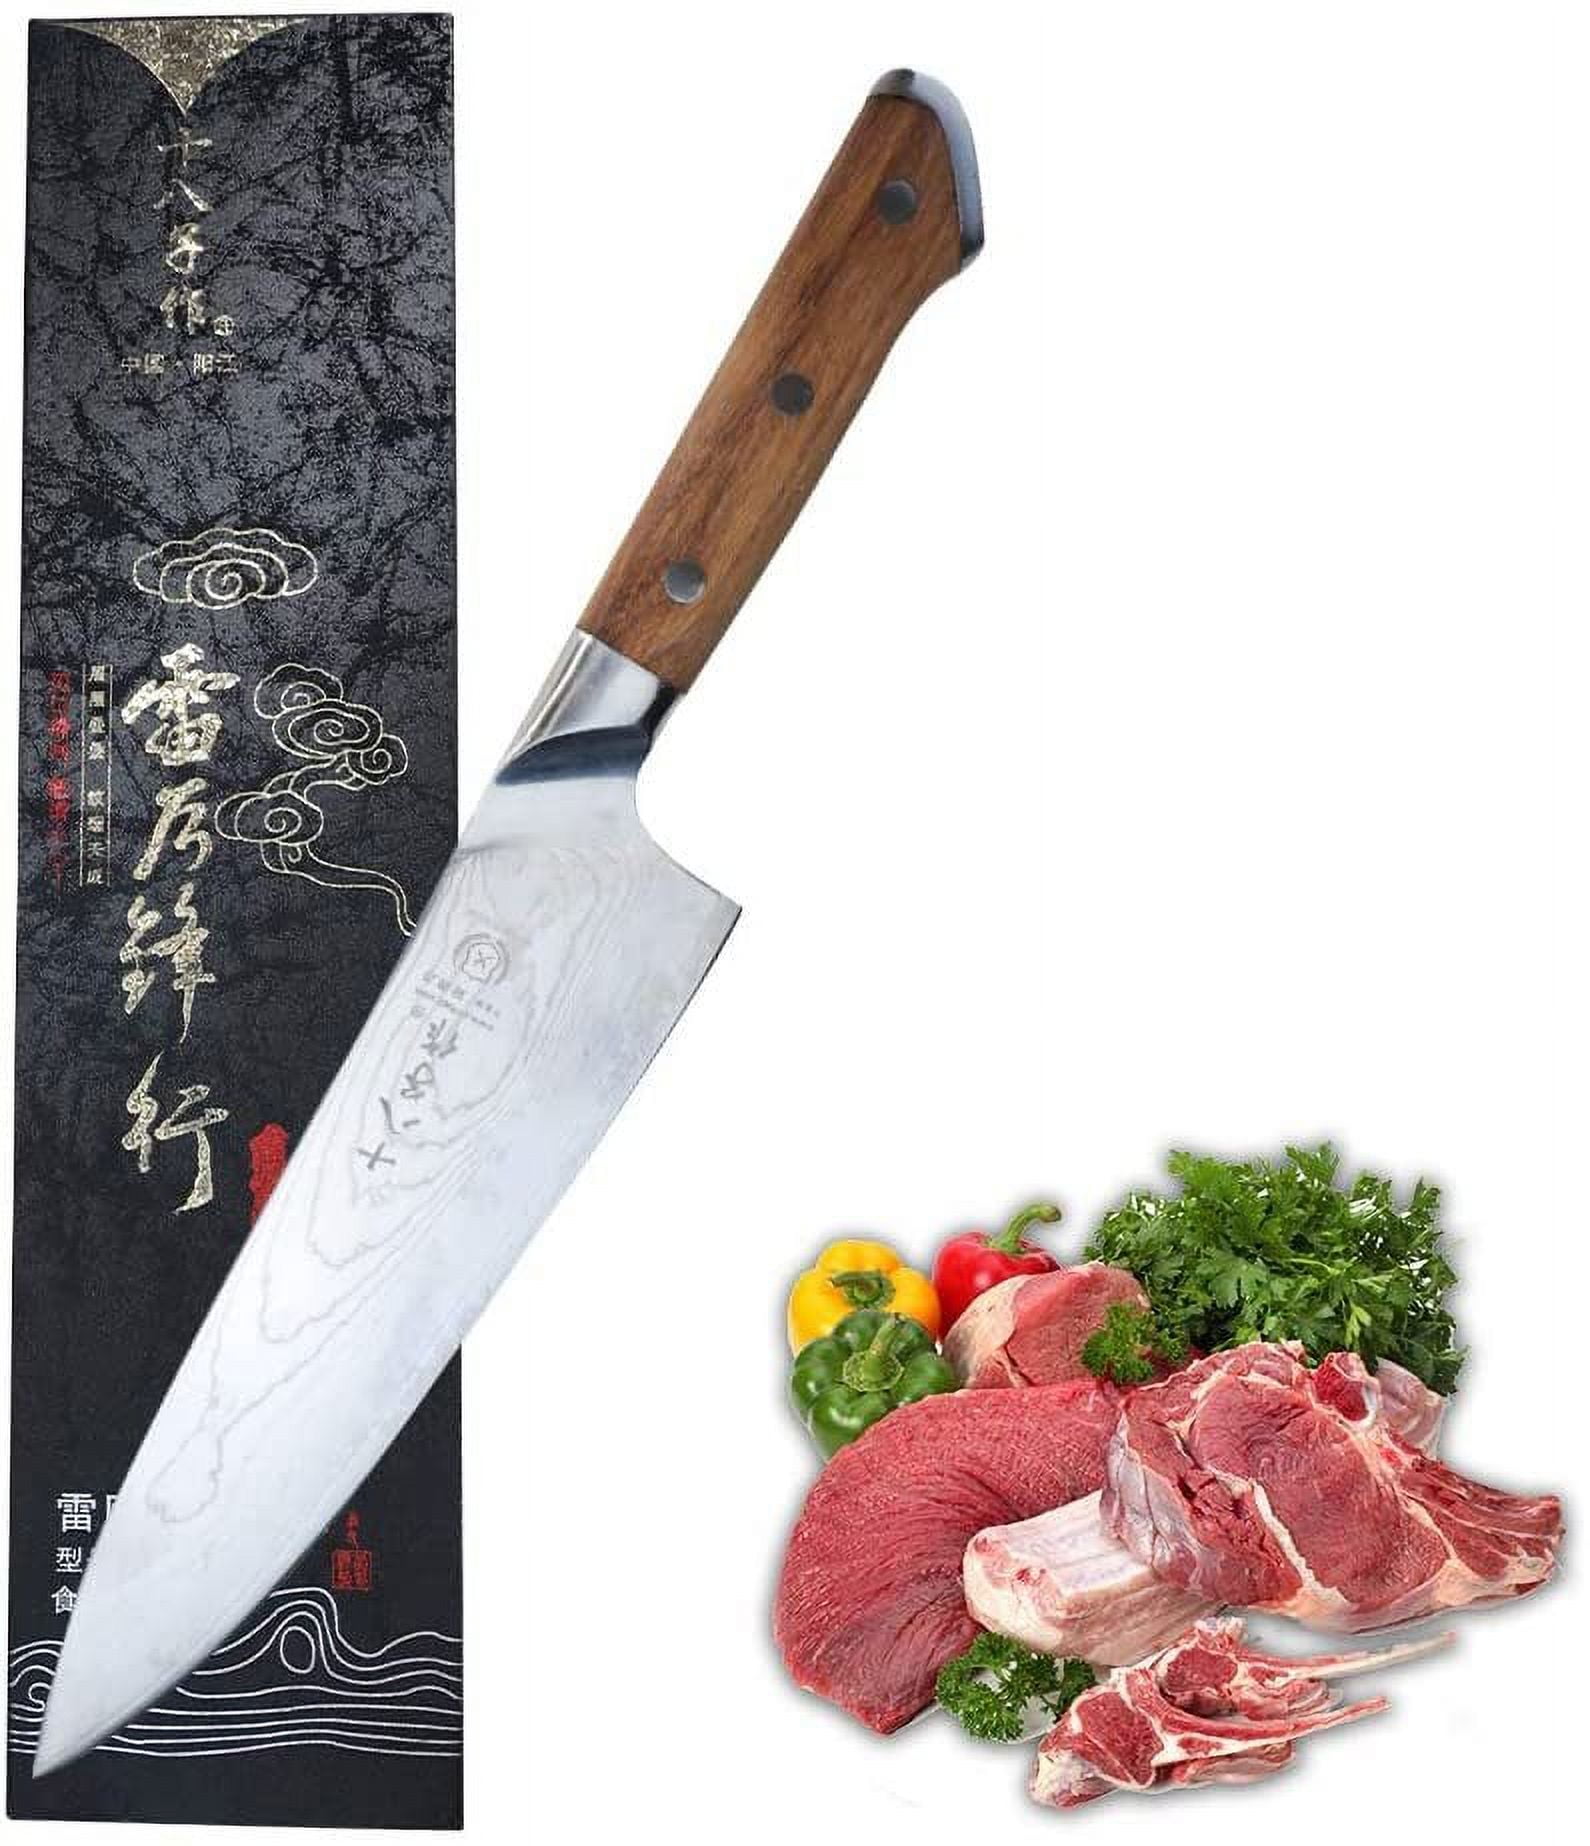 Shi Ba Zi Zuo Chinese Cleaver Review - Chinese Vegetable Cleaver